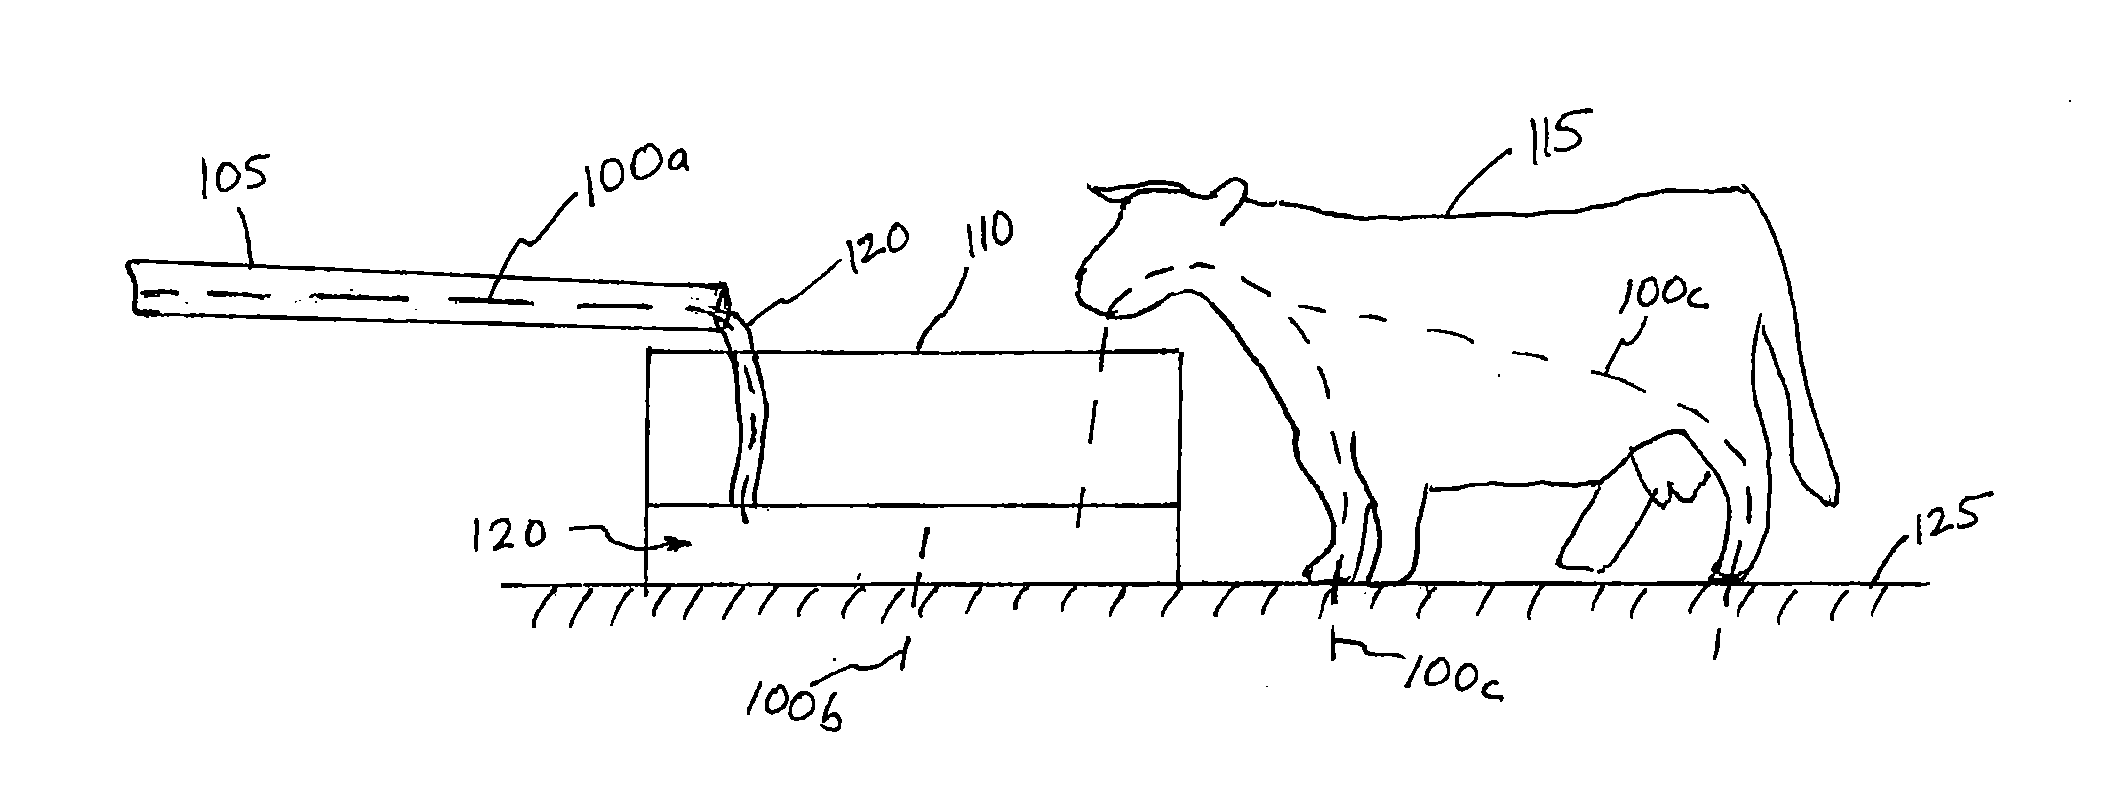 Method And Apparatus For Monitoring And Mitigating Stray Electrical Energy